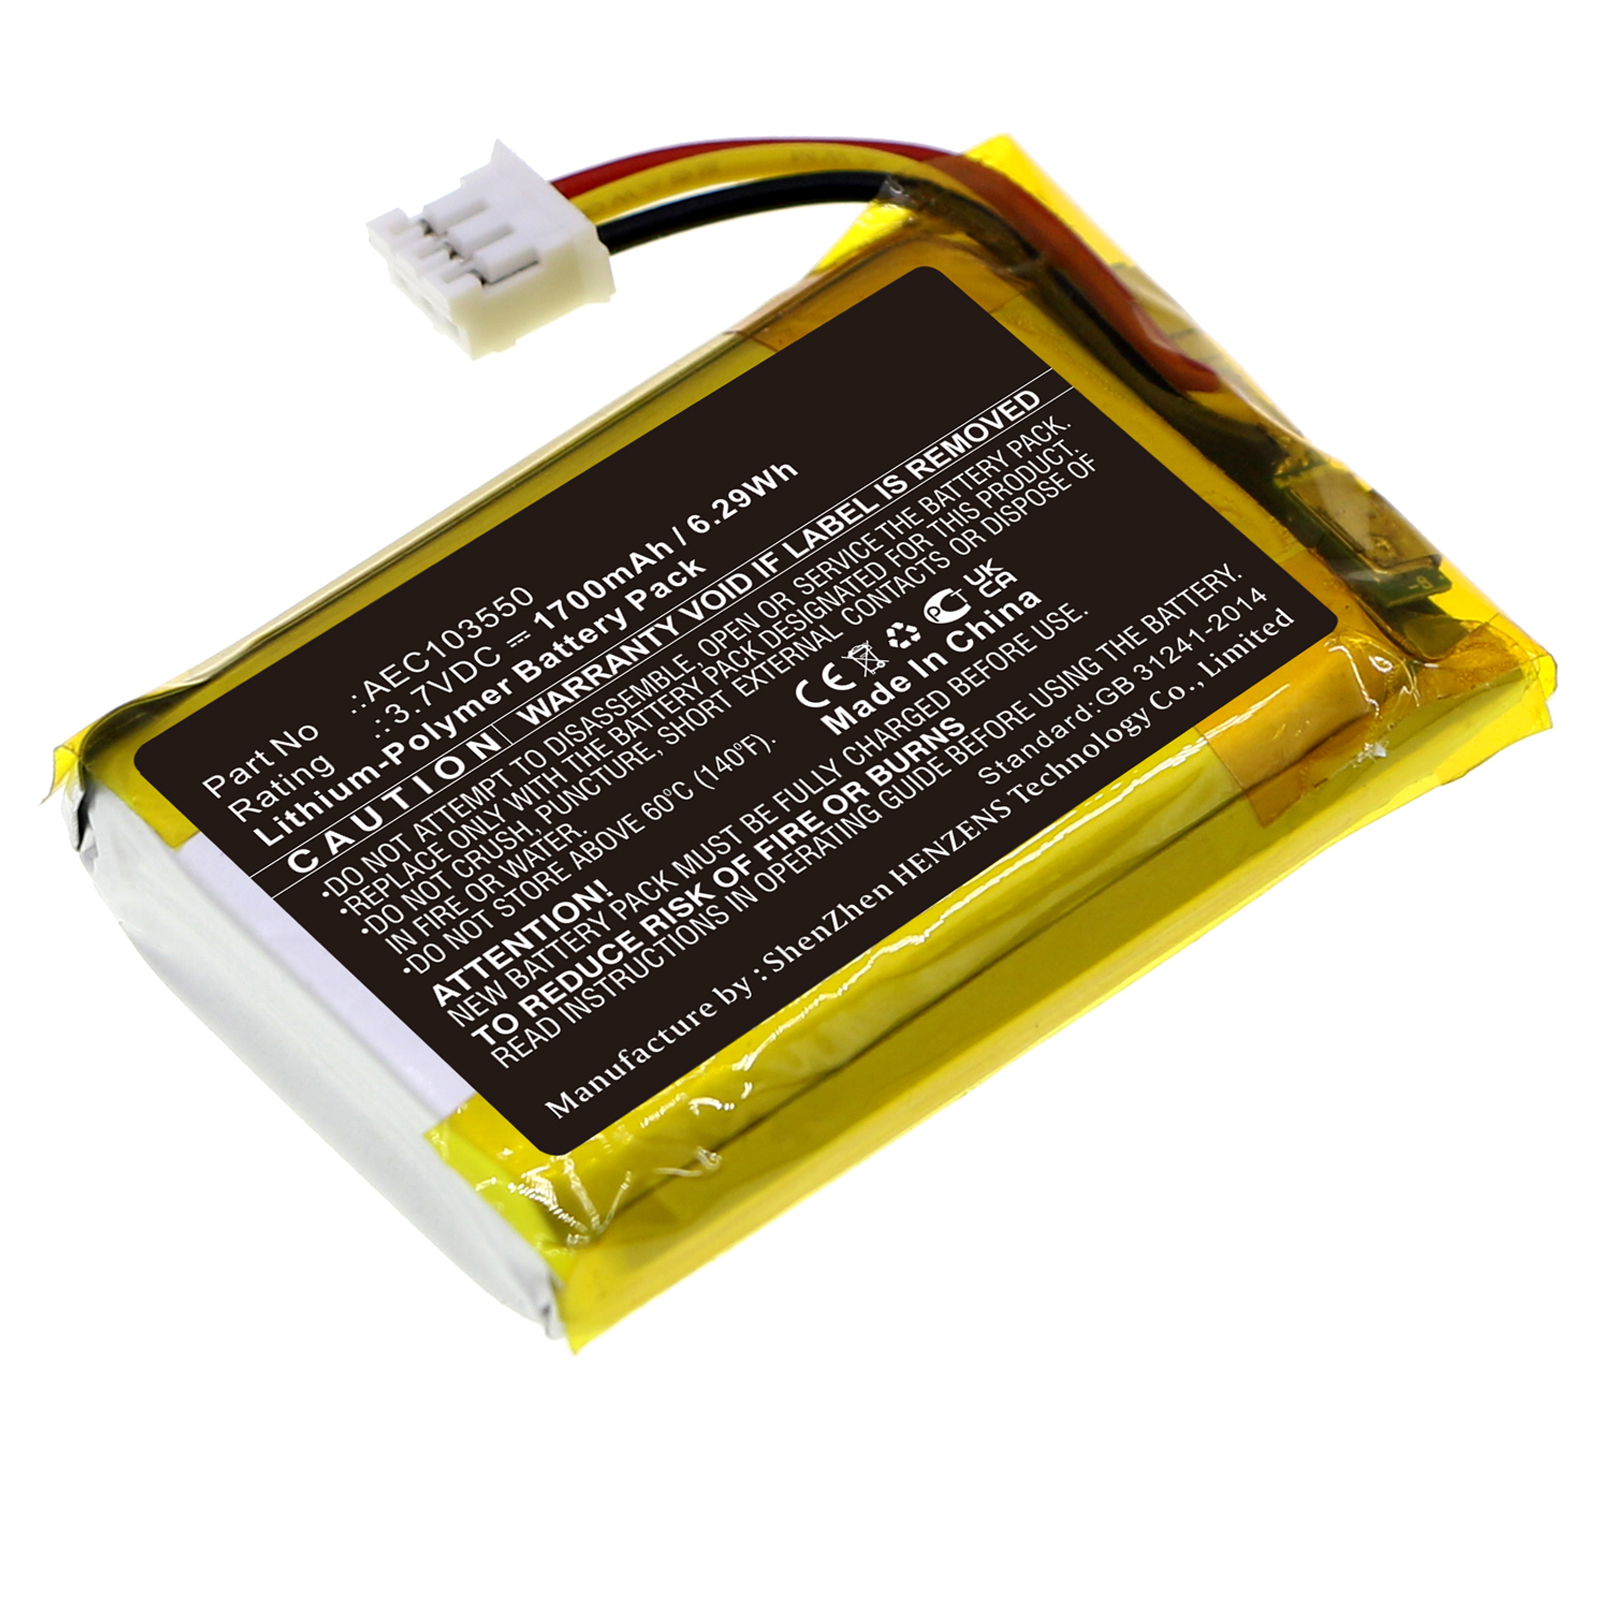 Synergy Digital Amplifier Battery, Compatible with HiFiMAN AEC103550 Amplifier Battery (Li-Pol, 3.7V, 1700mAh)